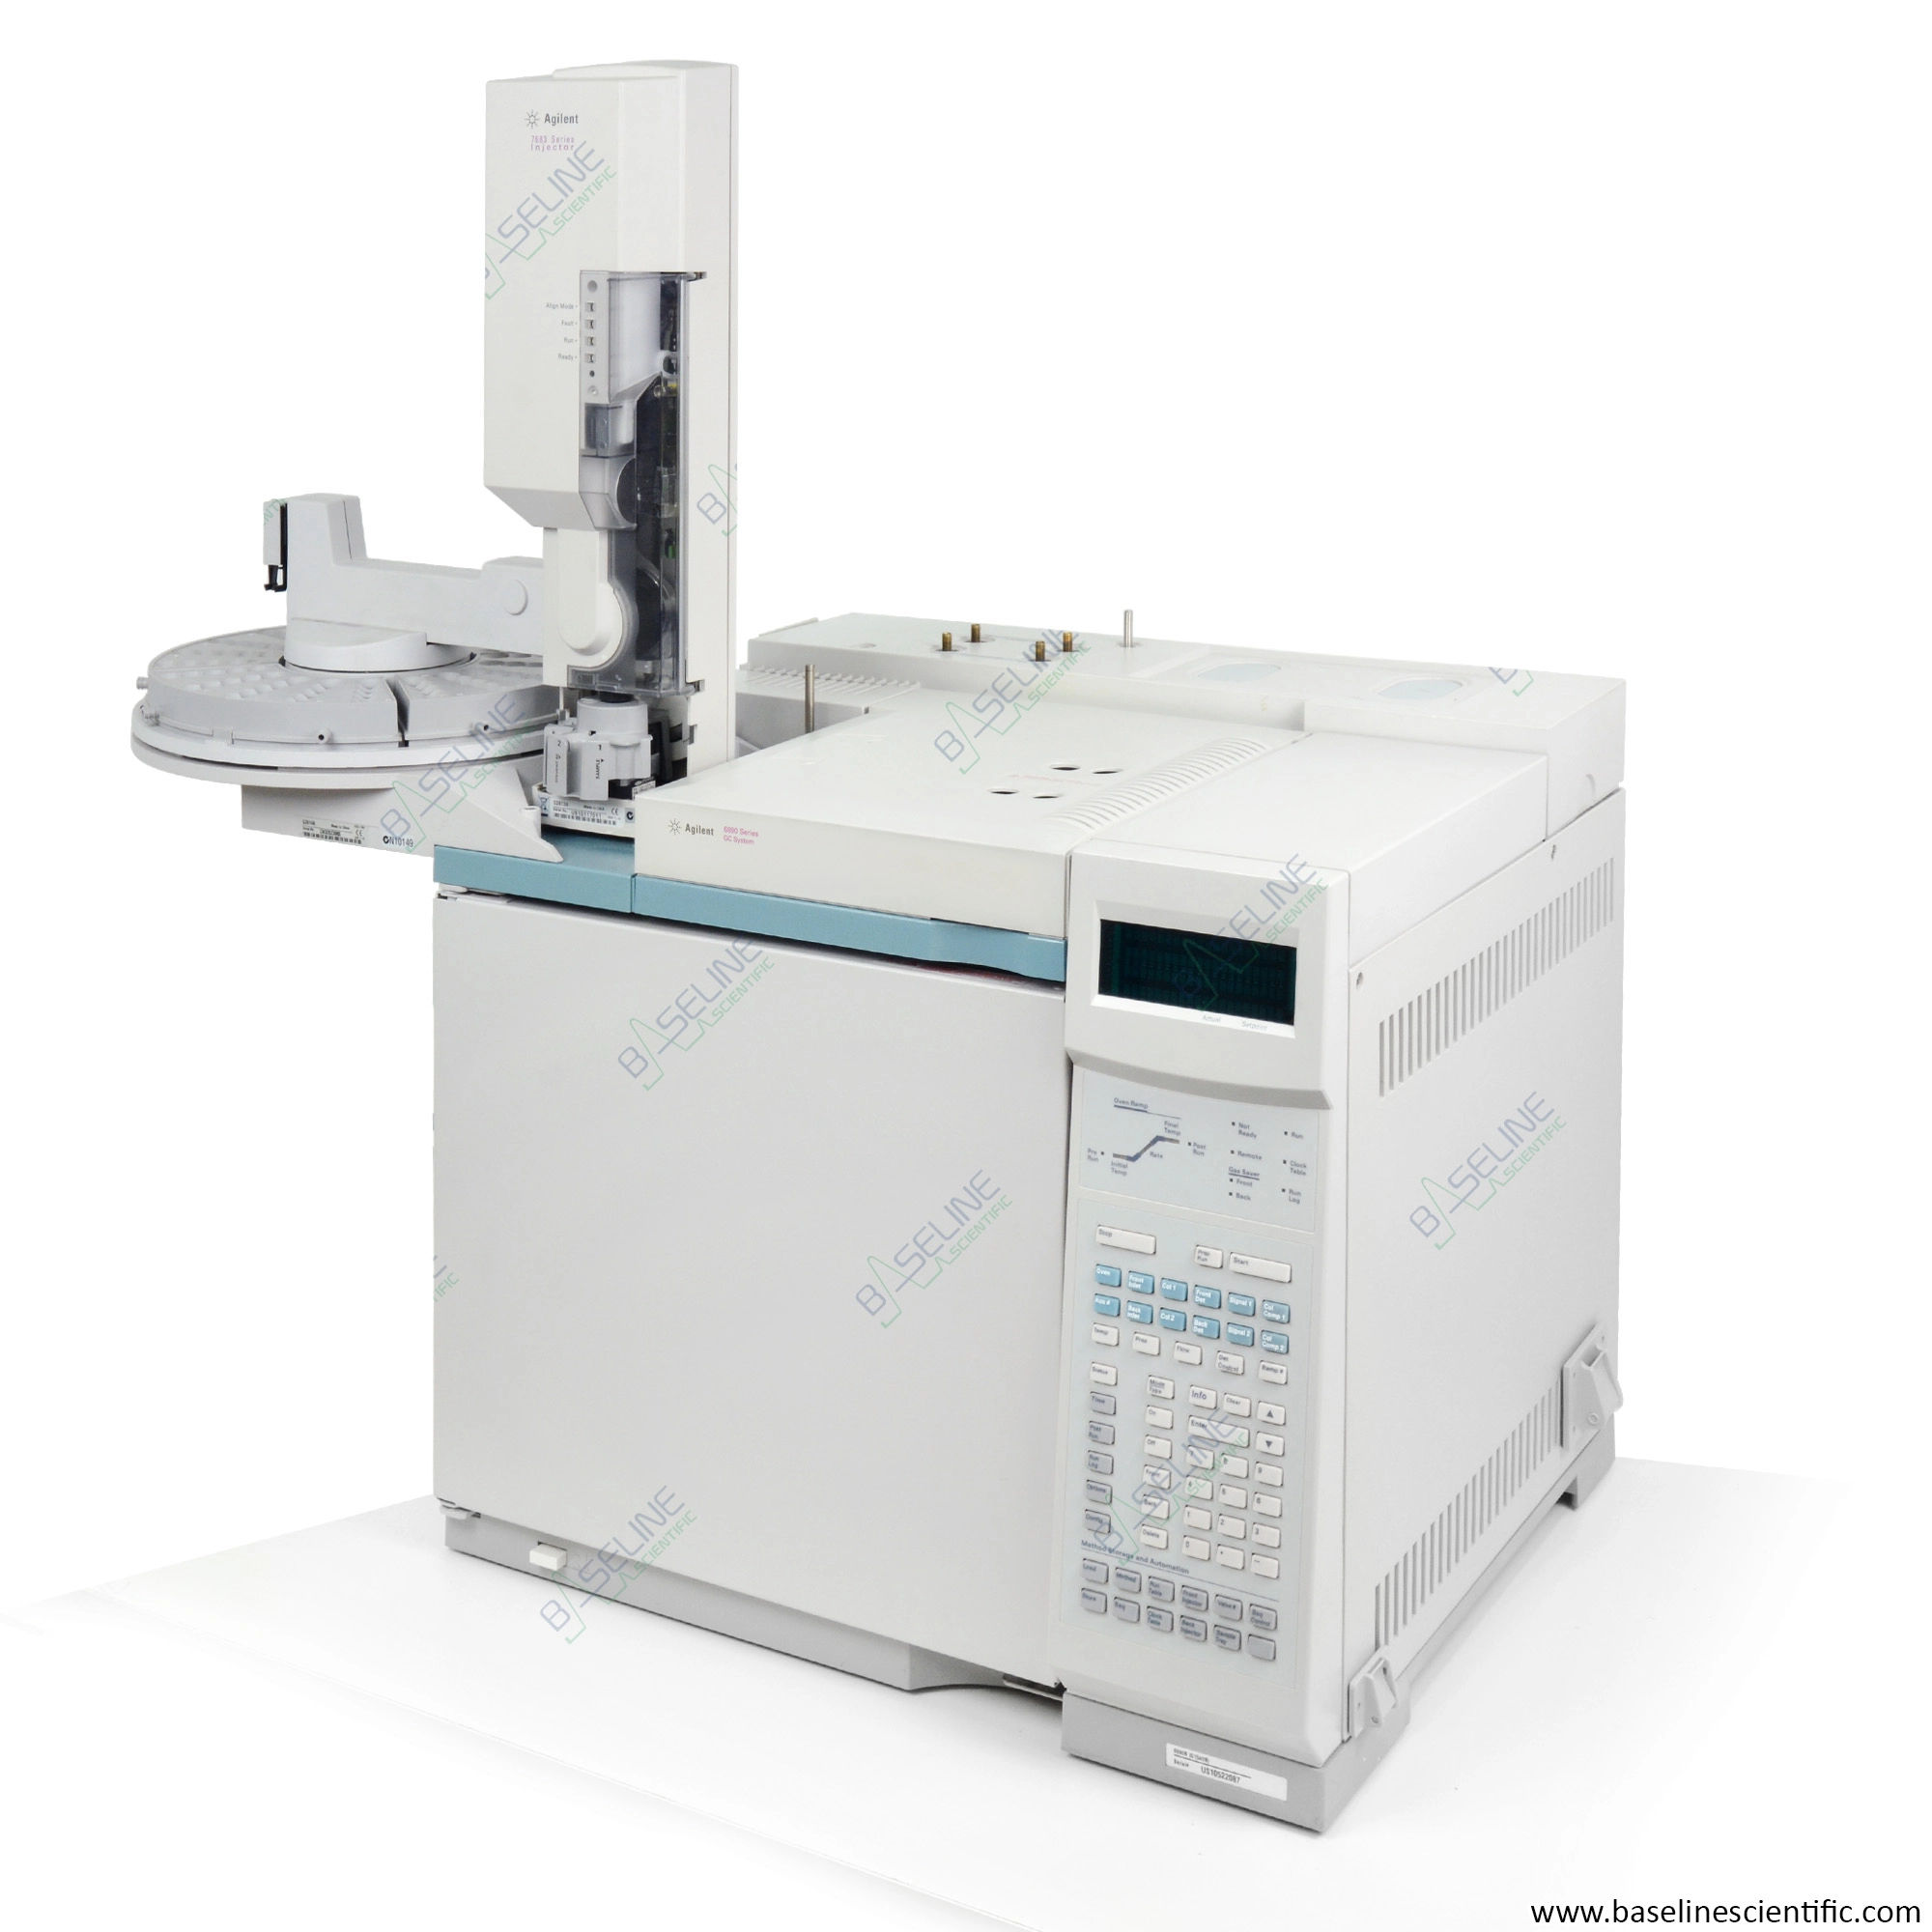 Refurbished Agilent 6890 GC with Single SSL, FPD and 7683 Series Autosampler